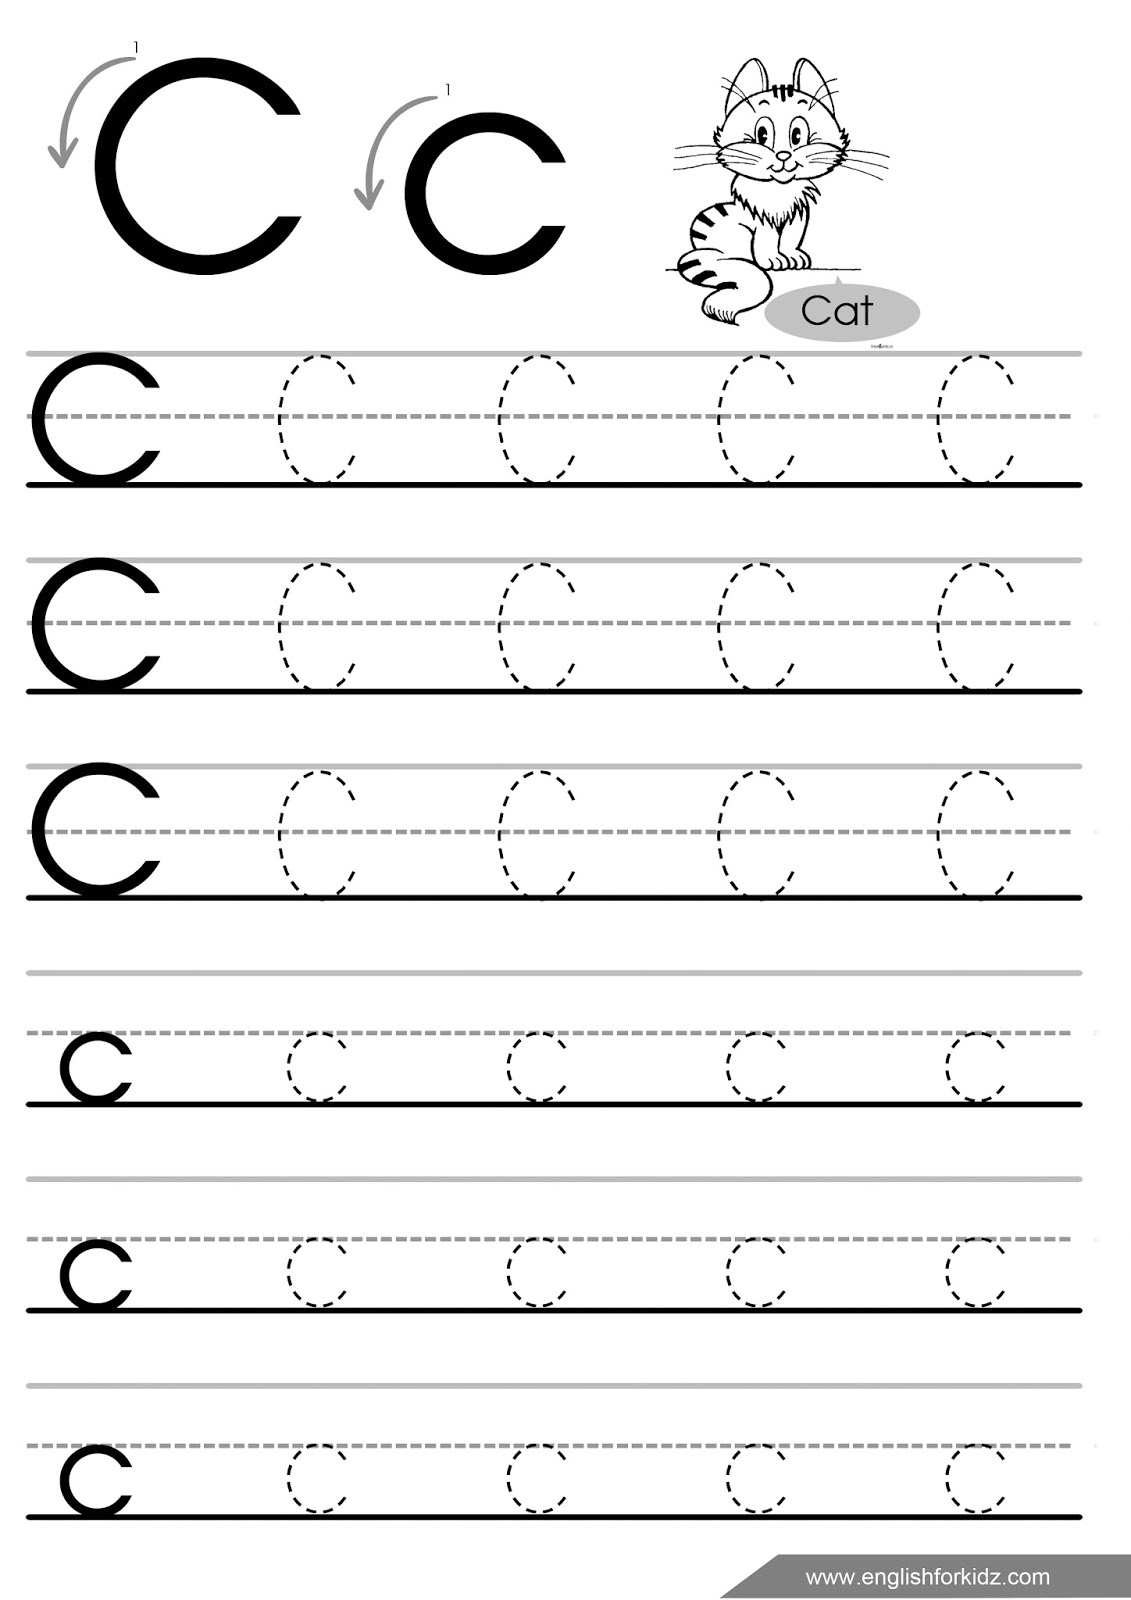 English For Kids Step By Step Letter C Worksheets Flash Cards